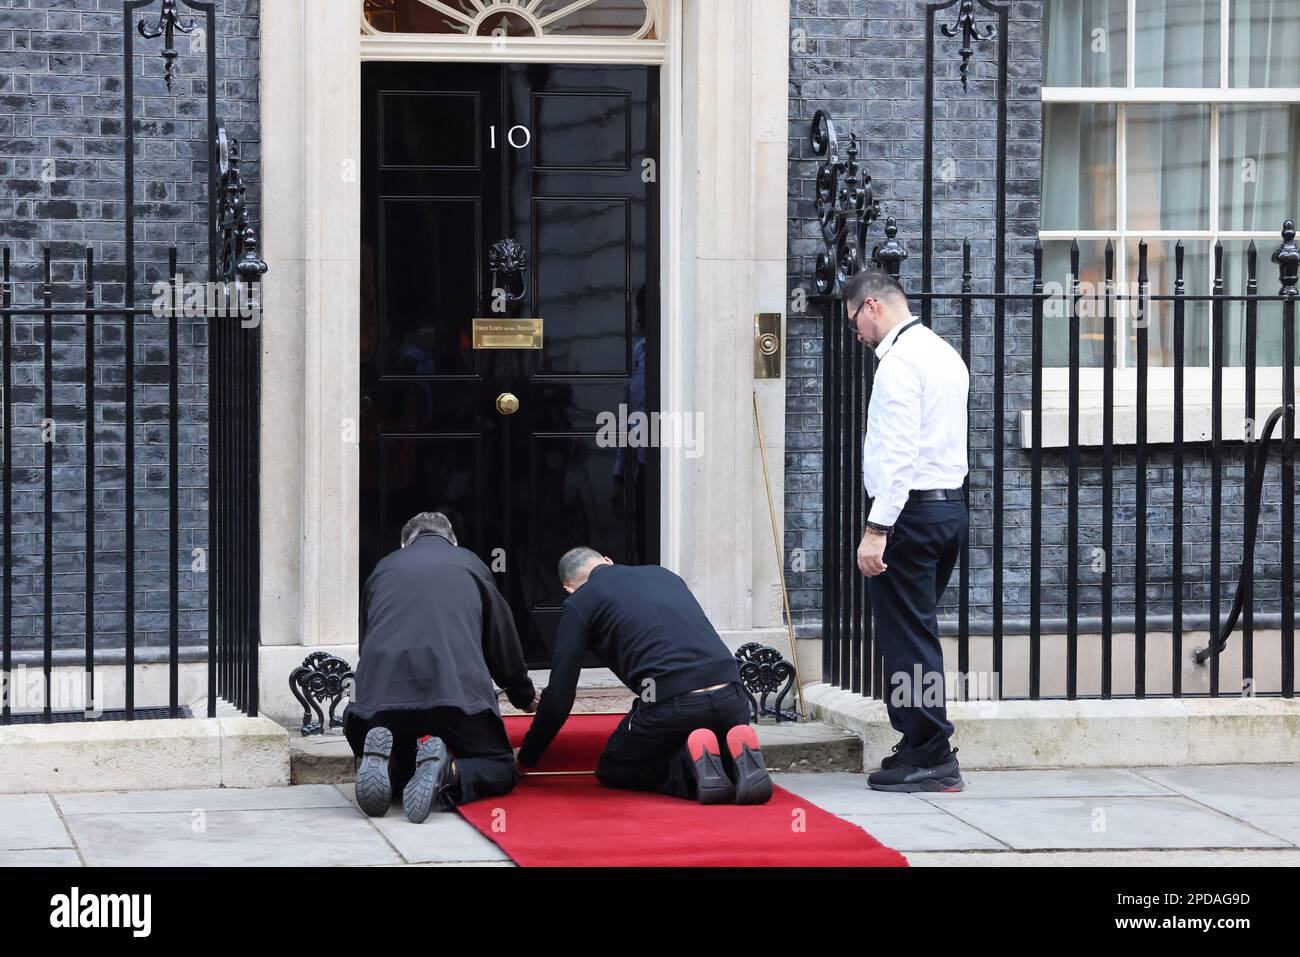 Rolling out the red carpet at no. 10 Downing Street, London, UK Stock Photo